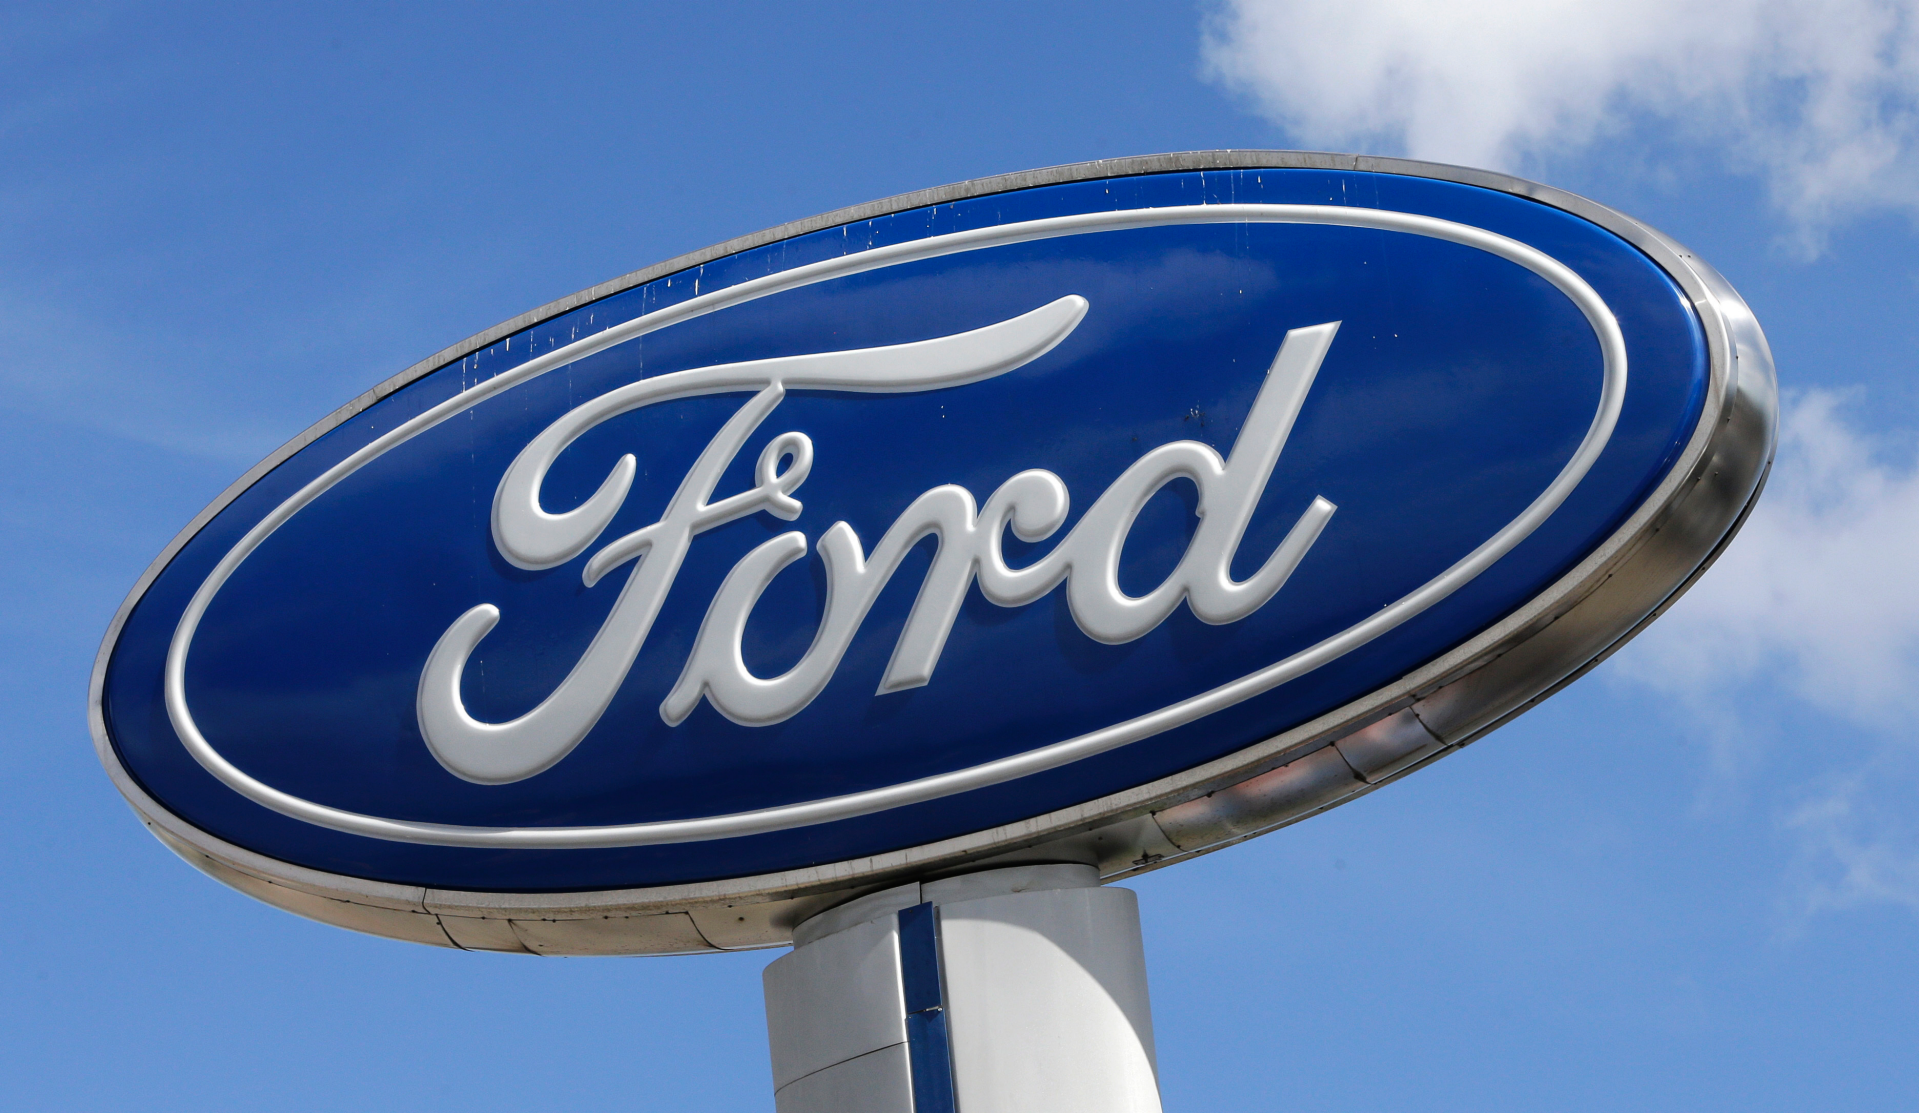 Parts shortage that hit Ford spreads to more companies Fox Business